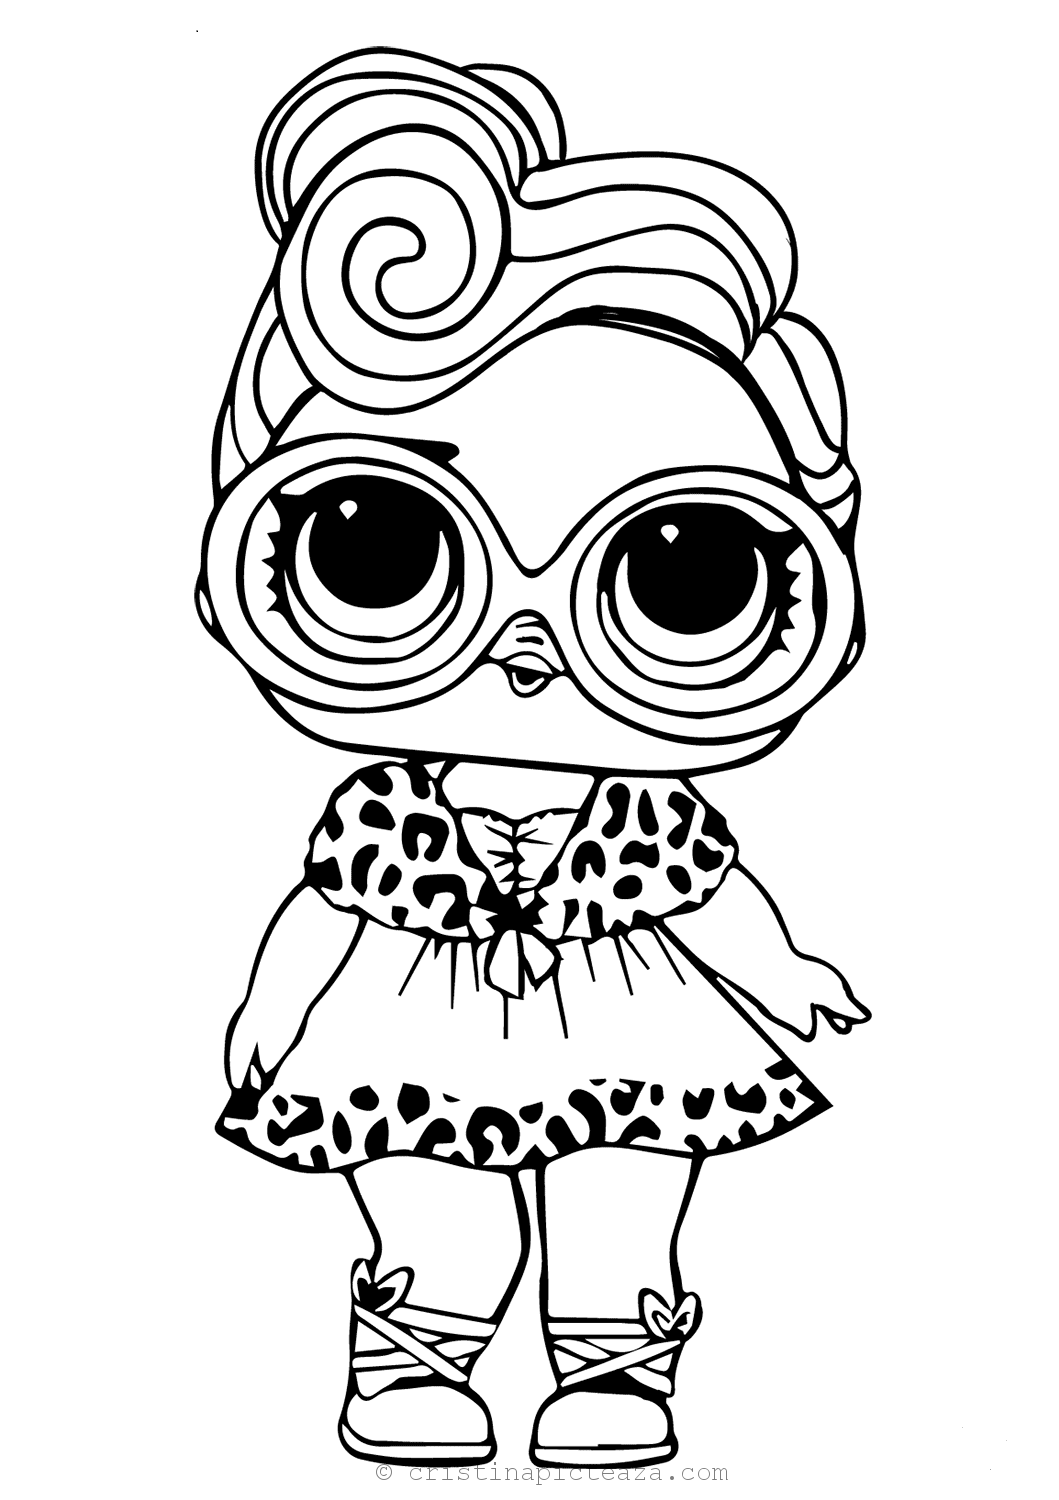 LOL Coloring Pages FREE Printable 79